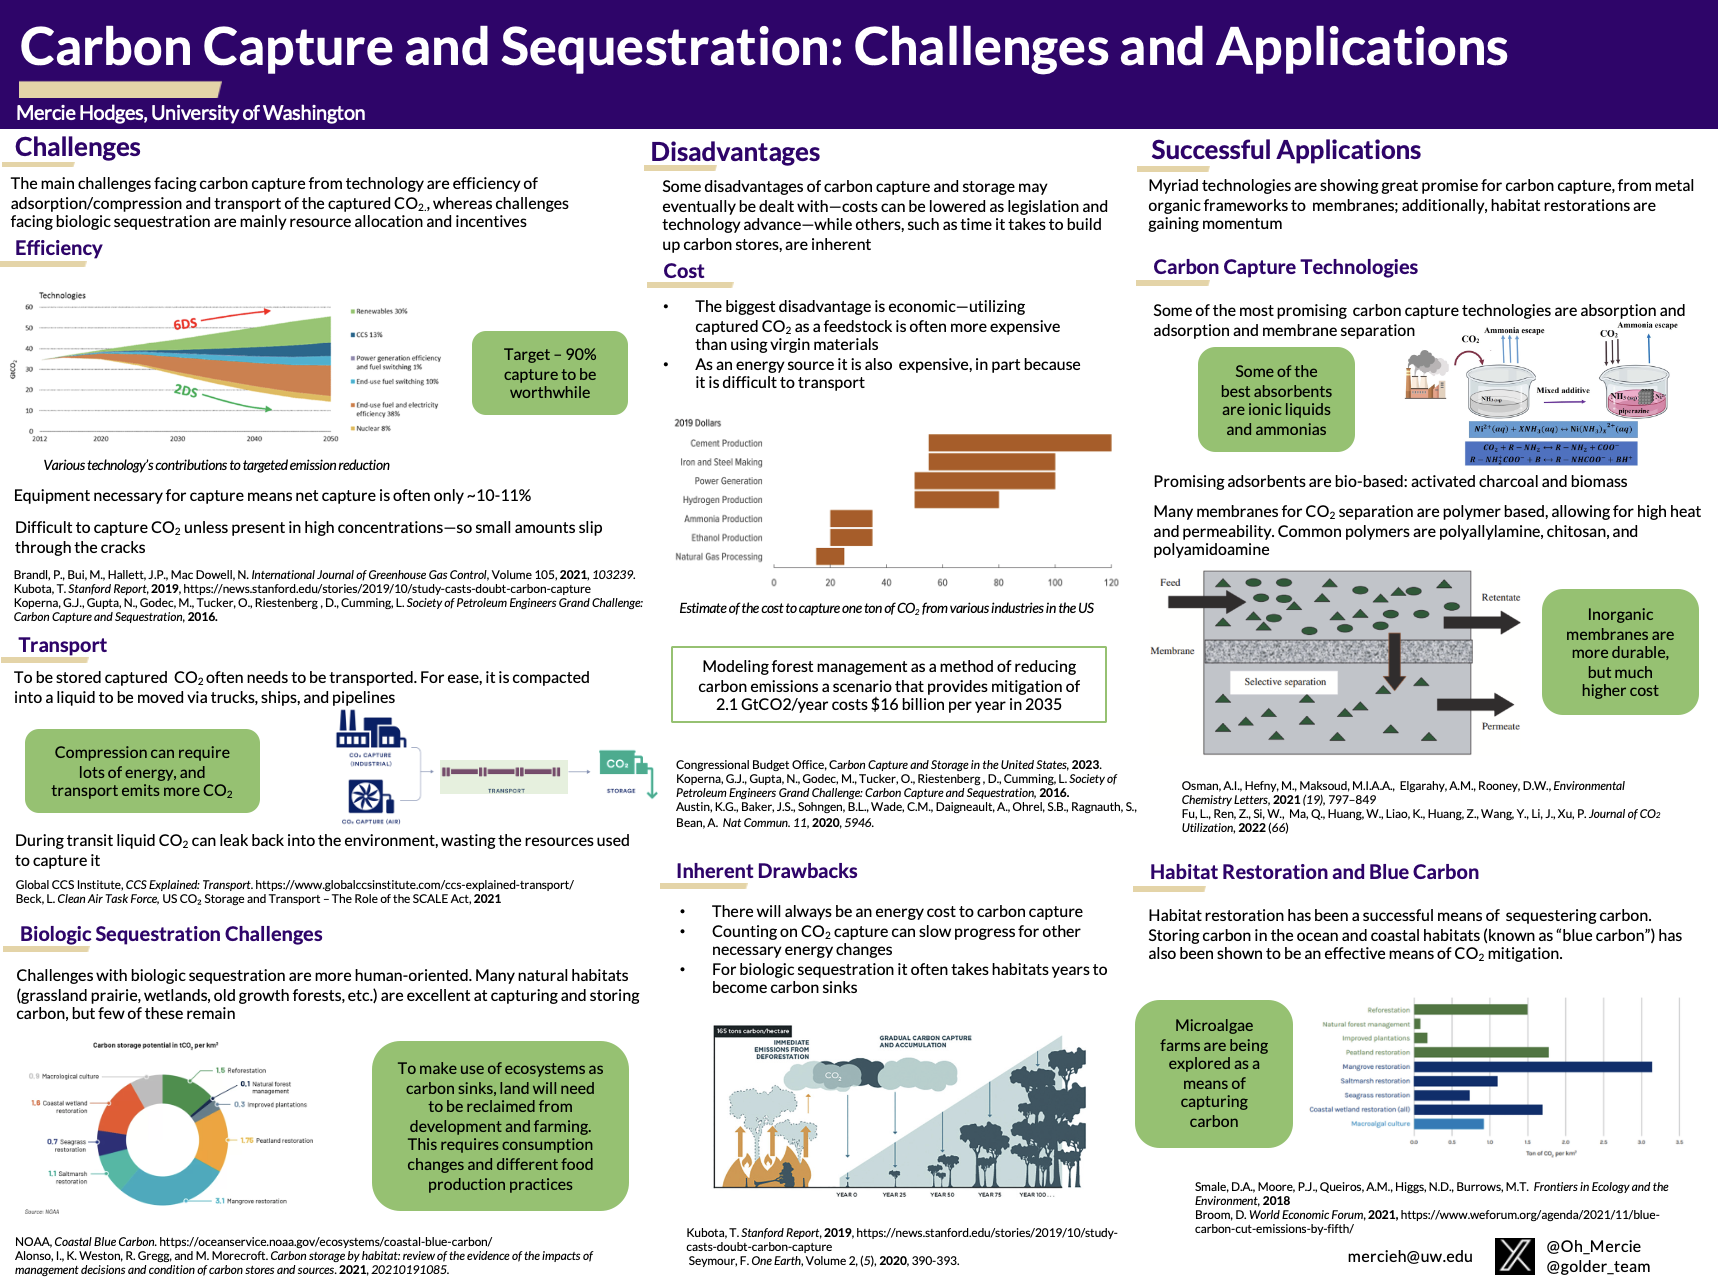 Poster on Challenges and Applications of Carbon Capture and Sequestration